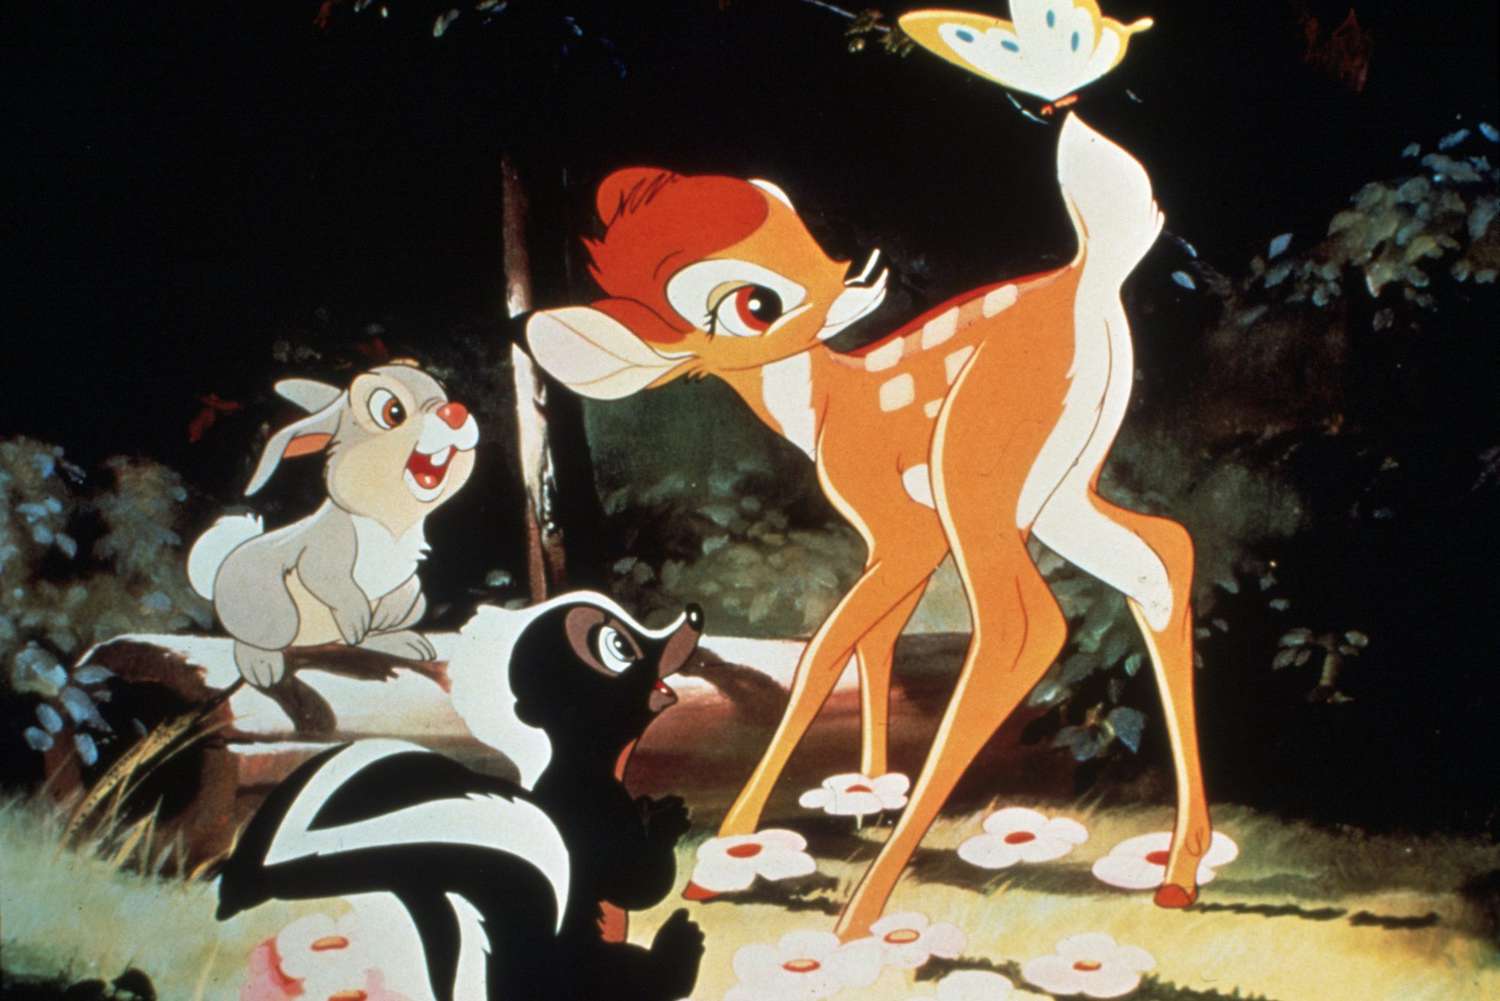 Bambi to become a killer deer in new horror movie Bambi: The Reckoning |  